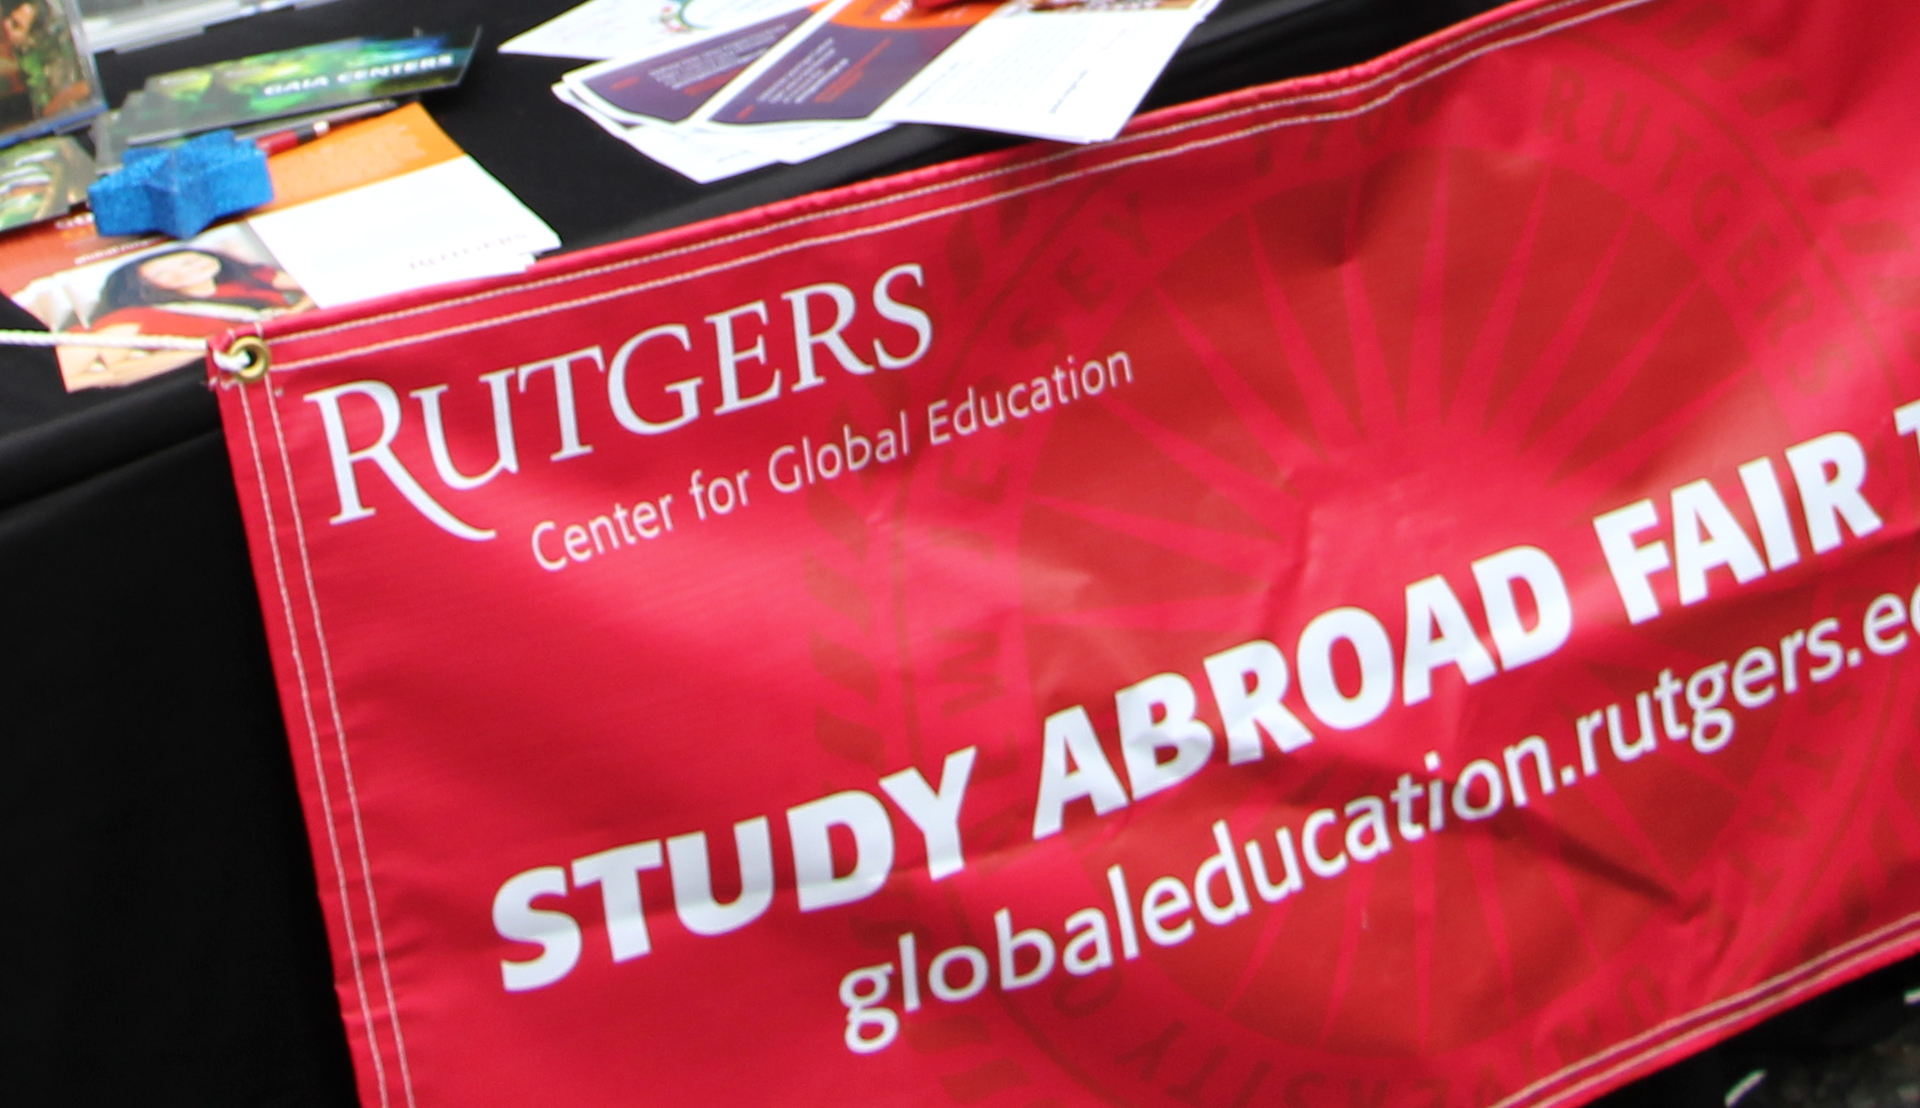 Rutgers Global - Spring 2016 Study Abroad Fair, study abroad fair today banner on exhibit table with assortment of Rutgers Global flyers